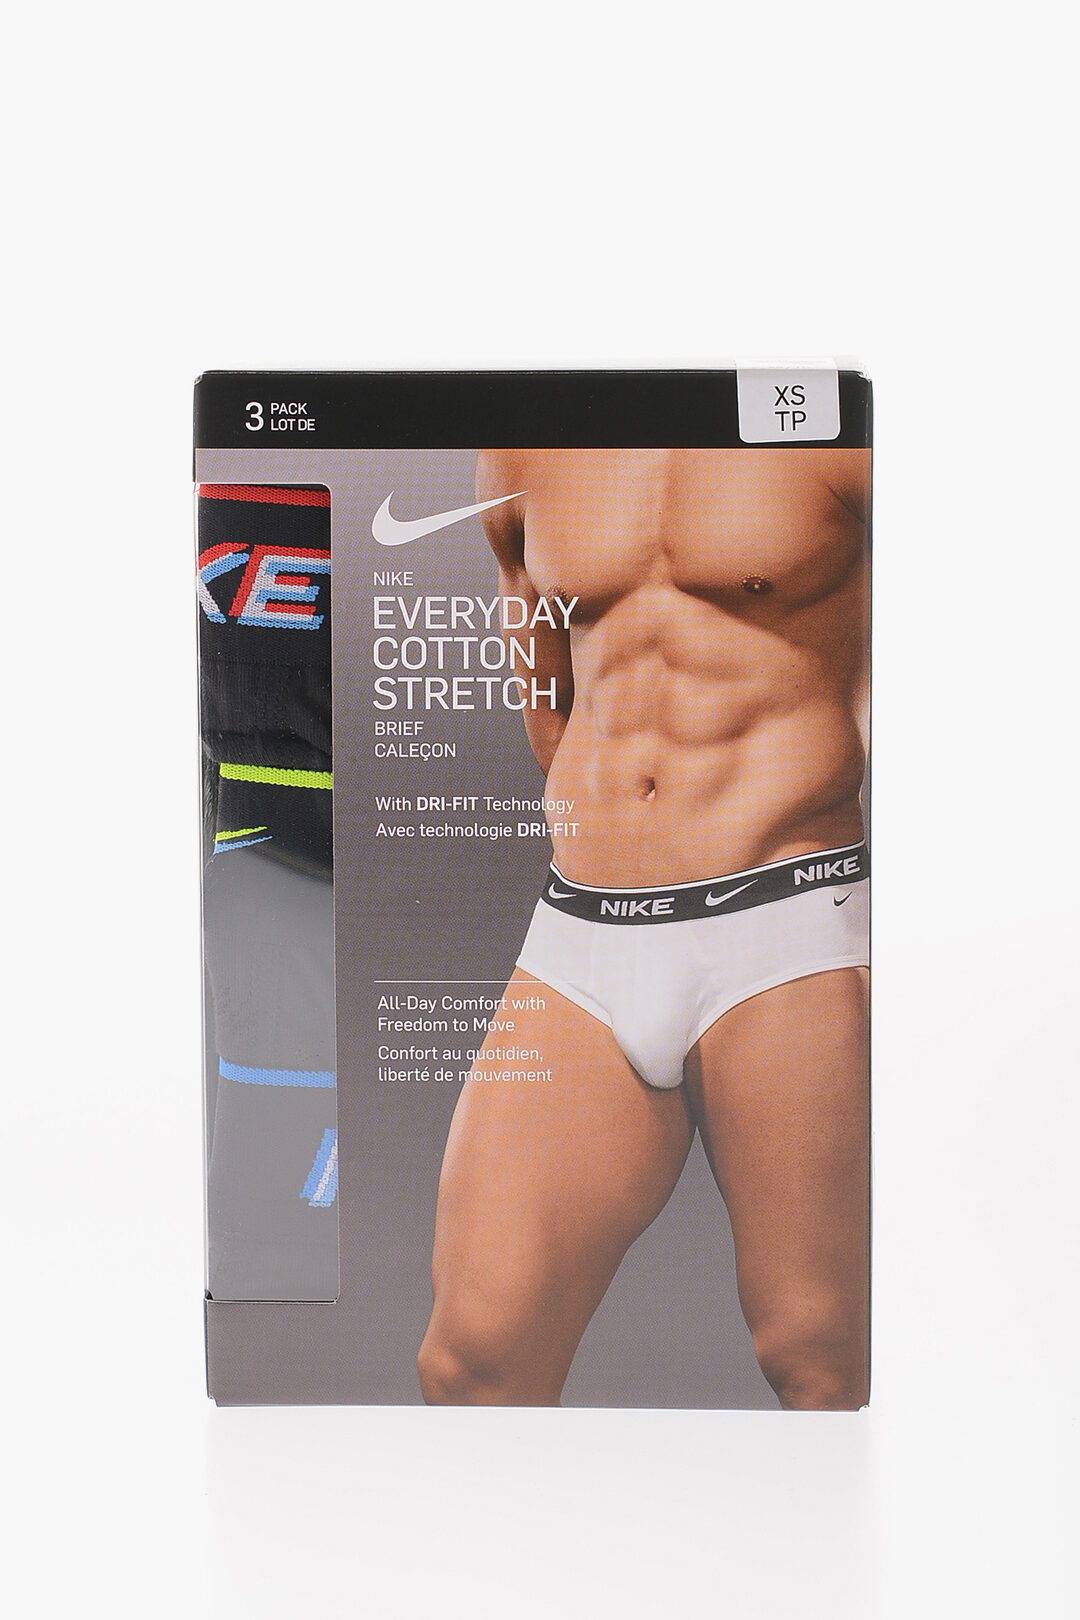 https://data.glamood.com/imgprodotto/set-of-3-stretch-cotton-briefs-with-logoed-elastic-band_1349473_zoom.jpg